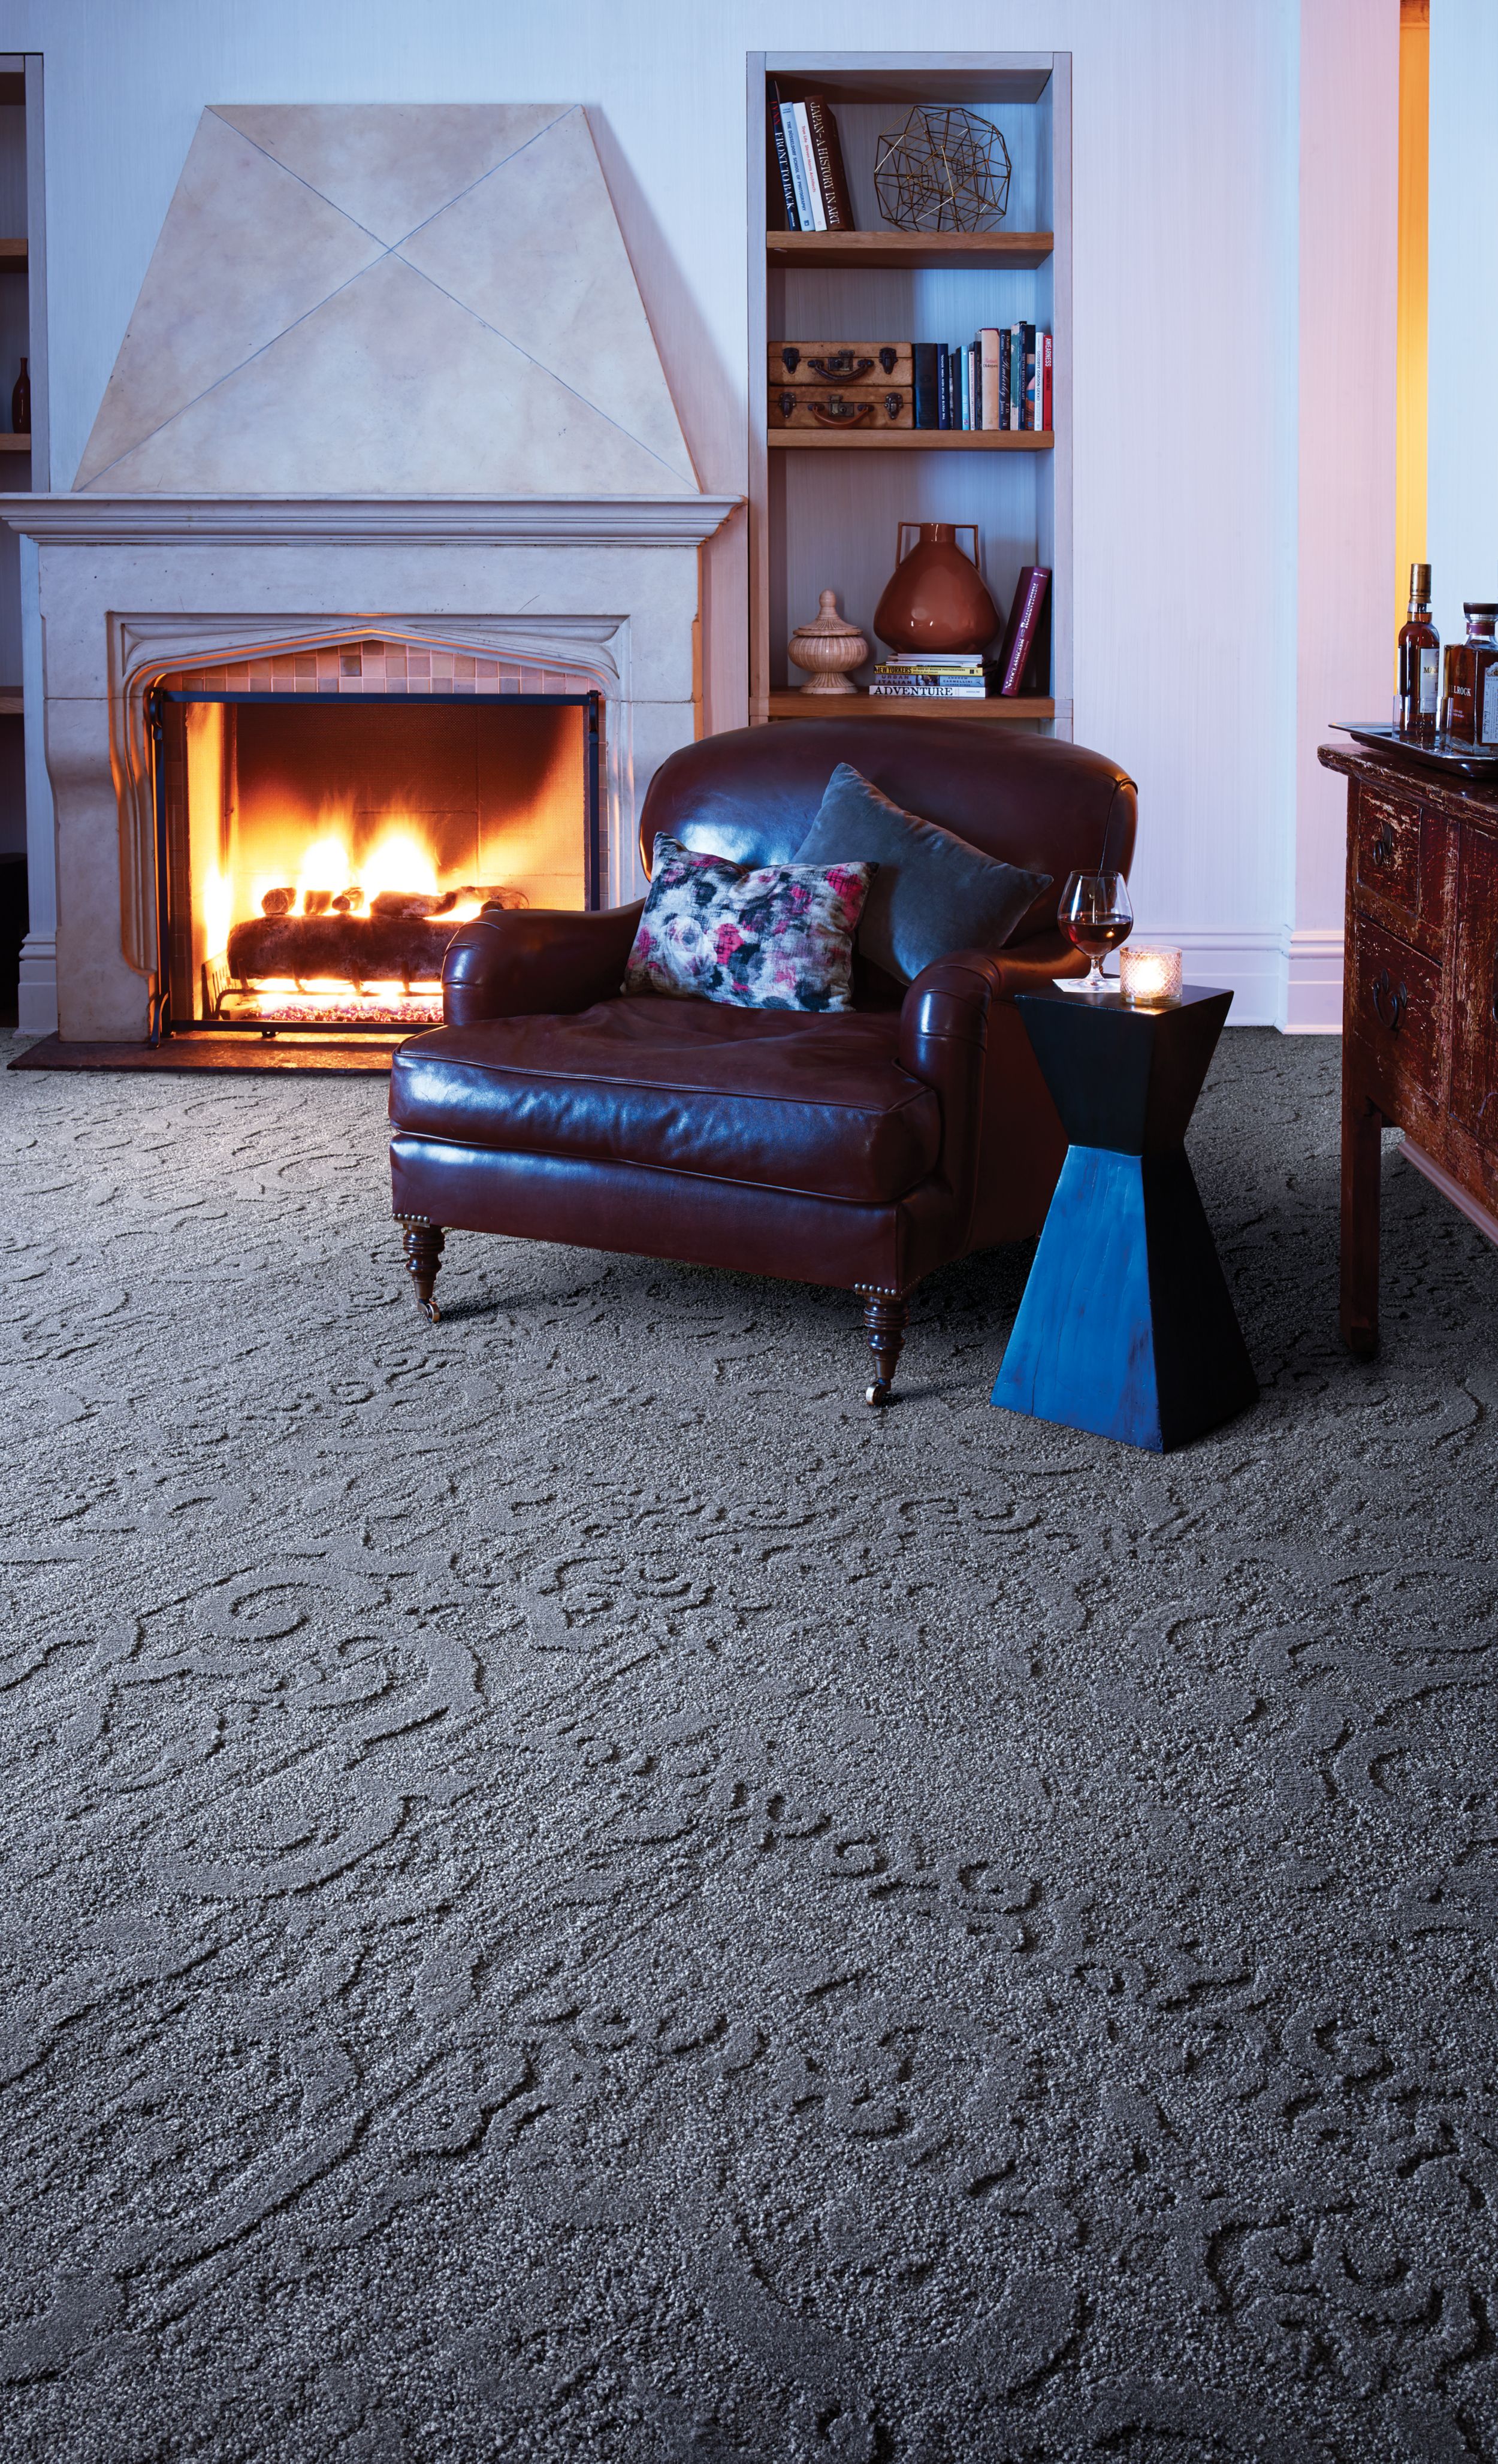 Interface NS230 carpet tile in room with fireplace and chair imagen número 4